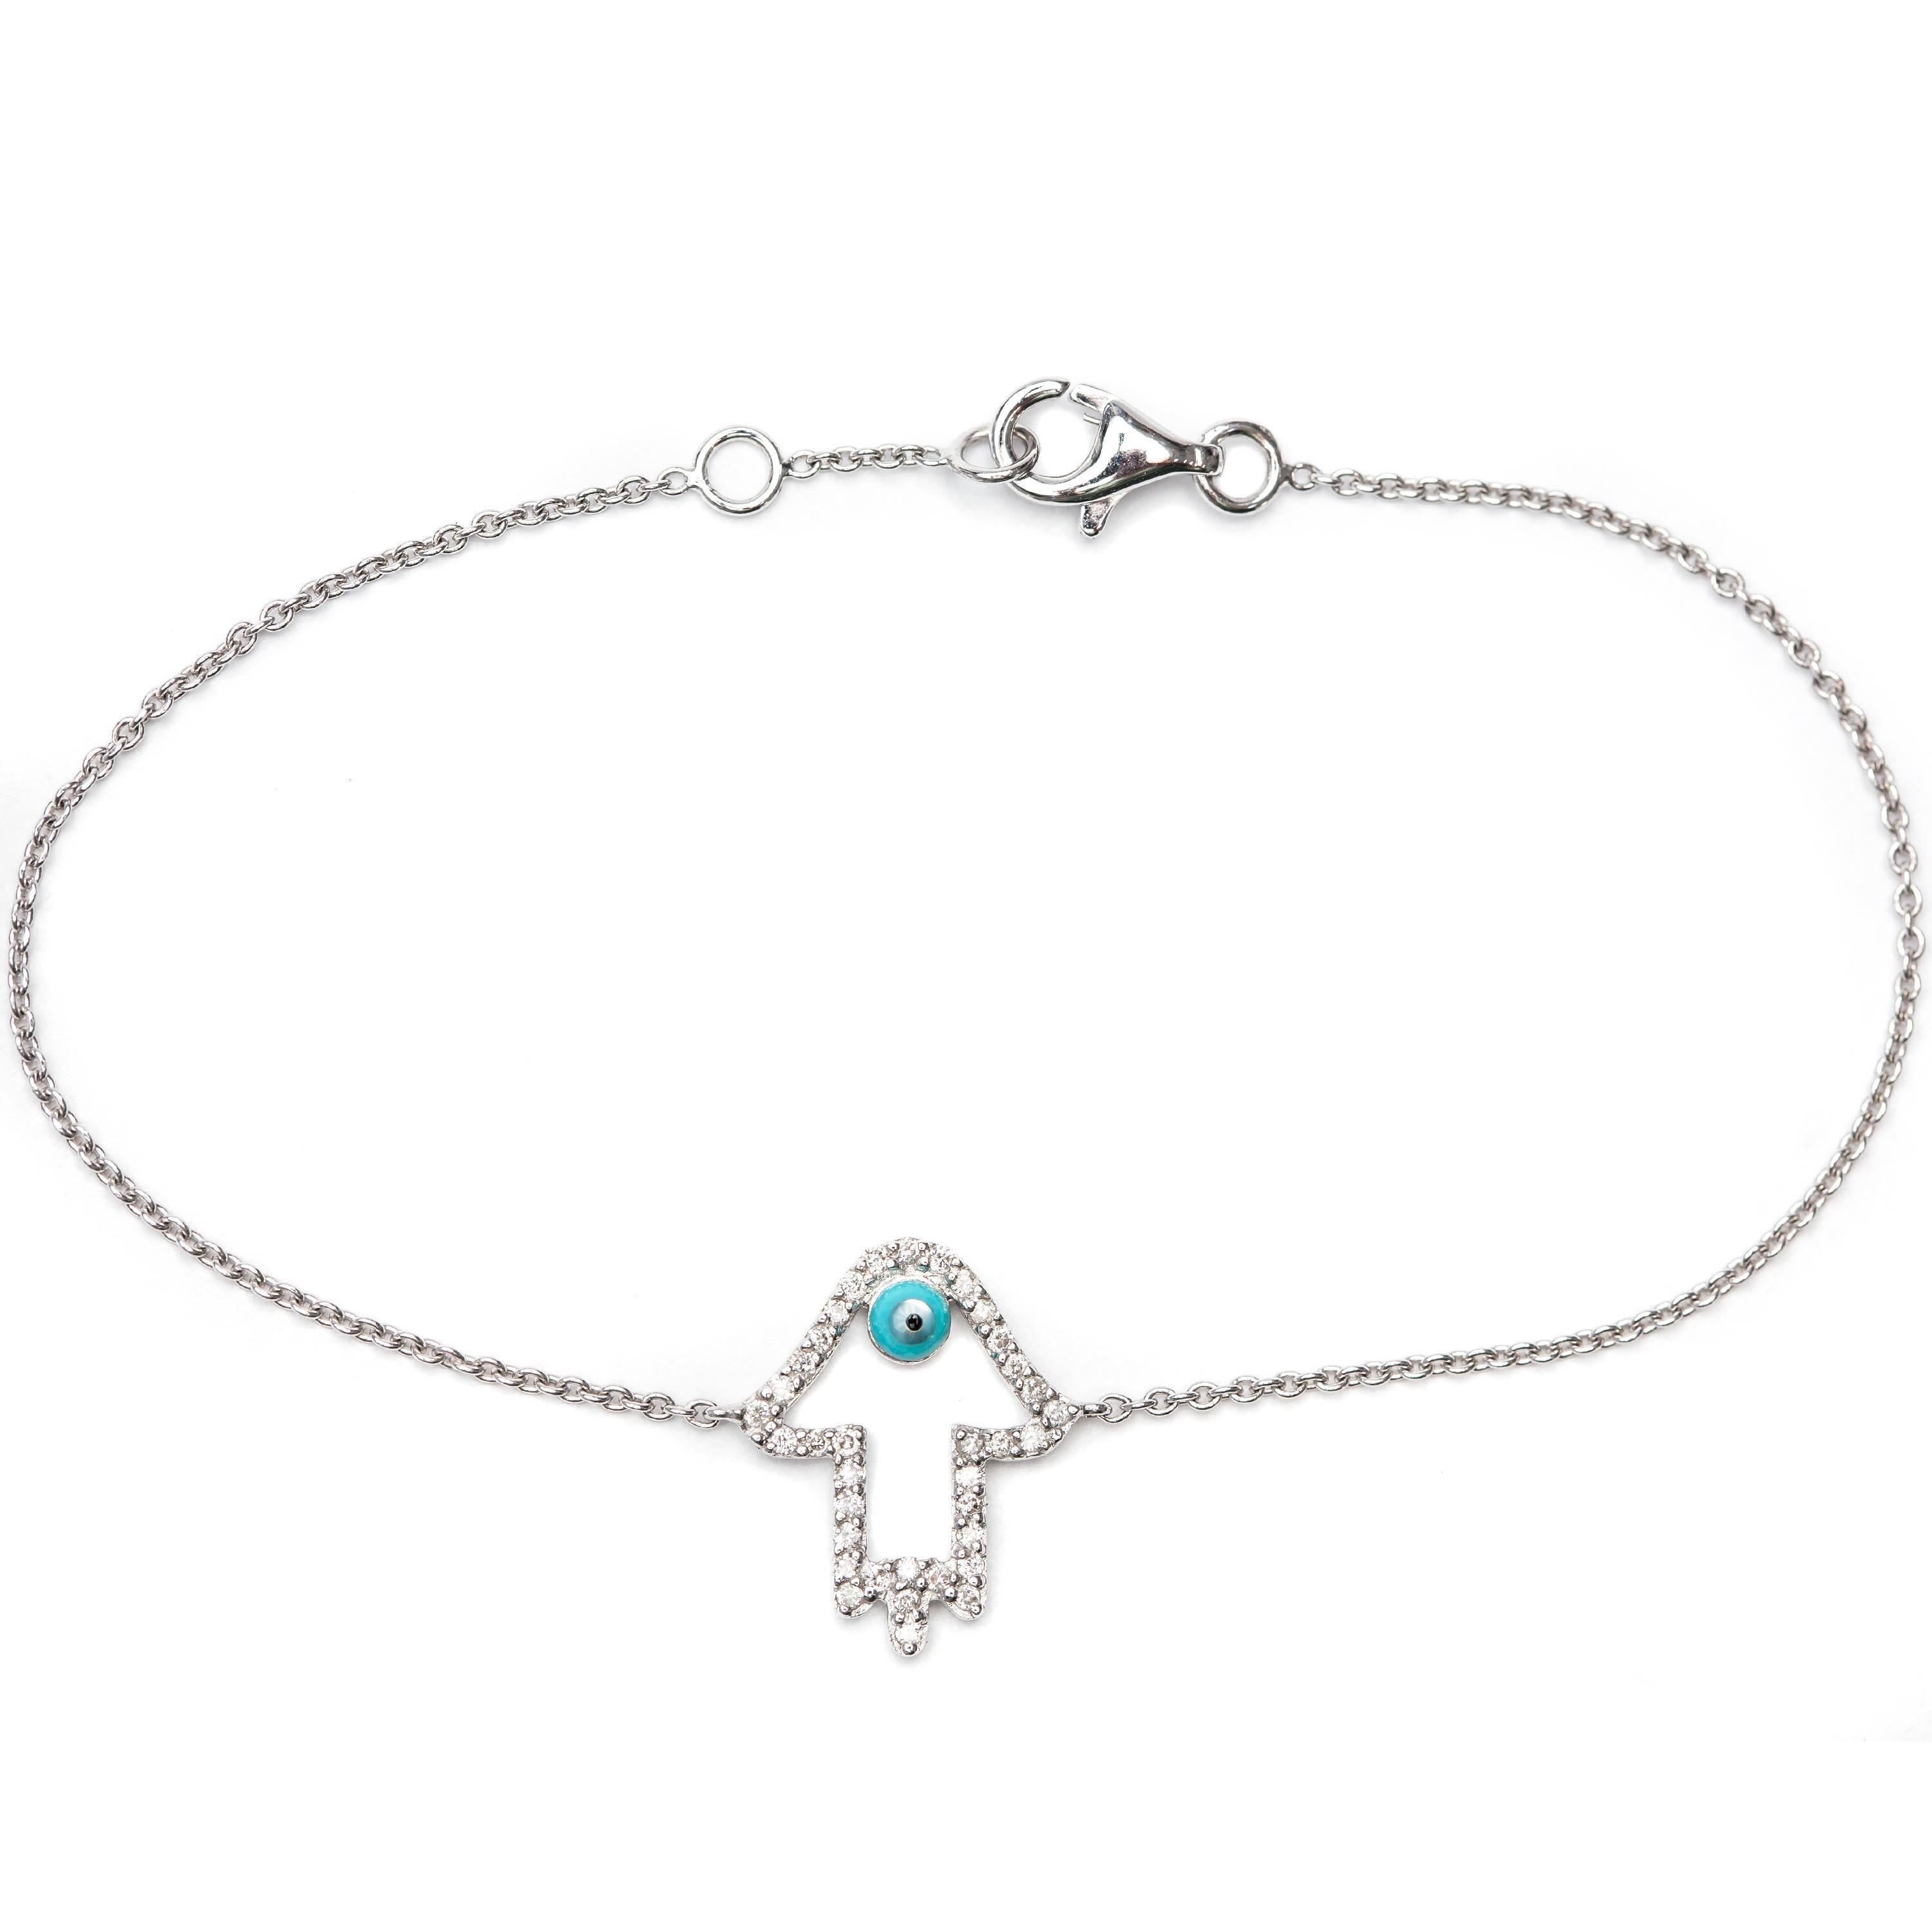 This luxurious Diamond Khamsa bracelet shimmers stunningly when it catches the light, featuring 0.25ct Round Brilliant H-SI1 Diamonds, this bracelet represents the ancient universal symbol of the evil eye, said to protect the wearer from any evil